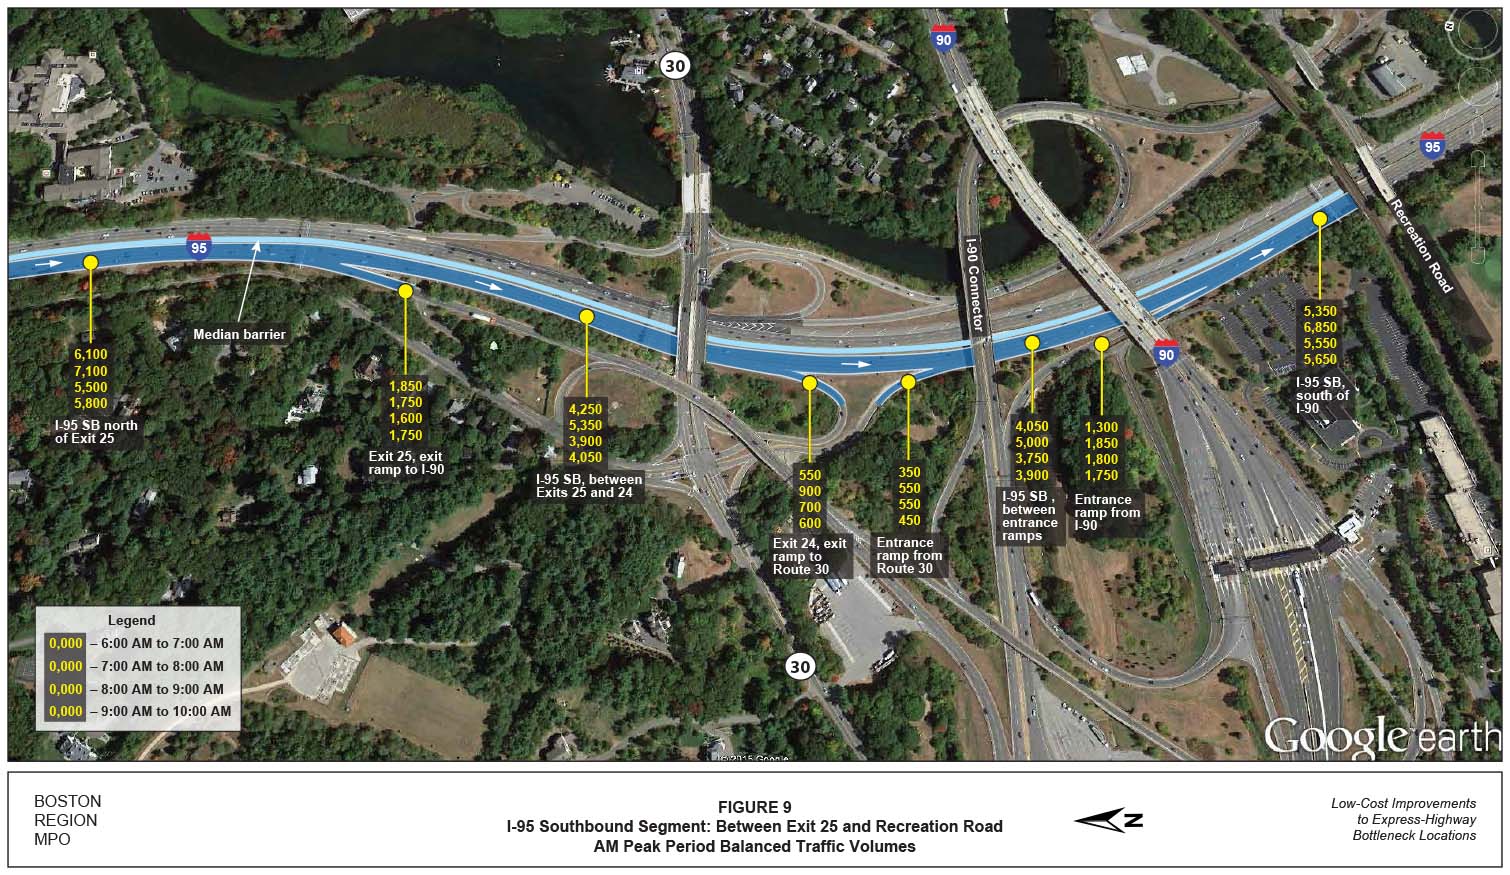 FIGURE 9. Aerial-view map showing the AM peak-period balanced traffic volumes for the I-95 southbound segment between Exit 25 and Recreation Road